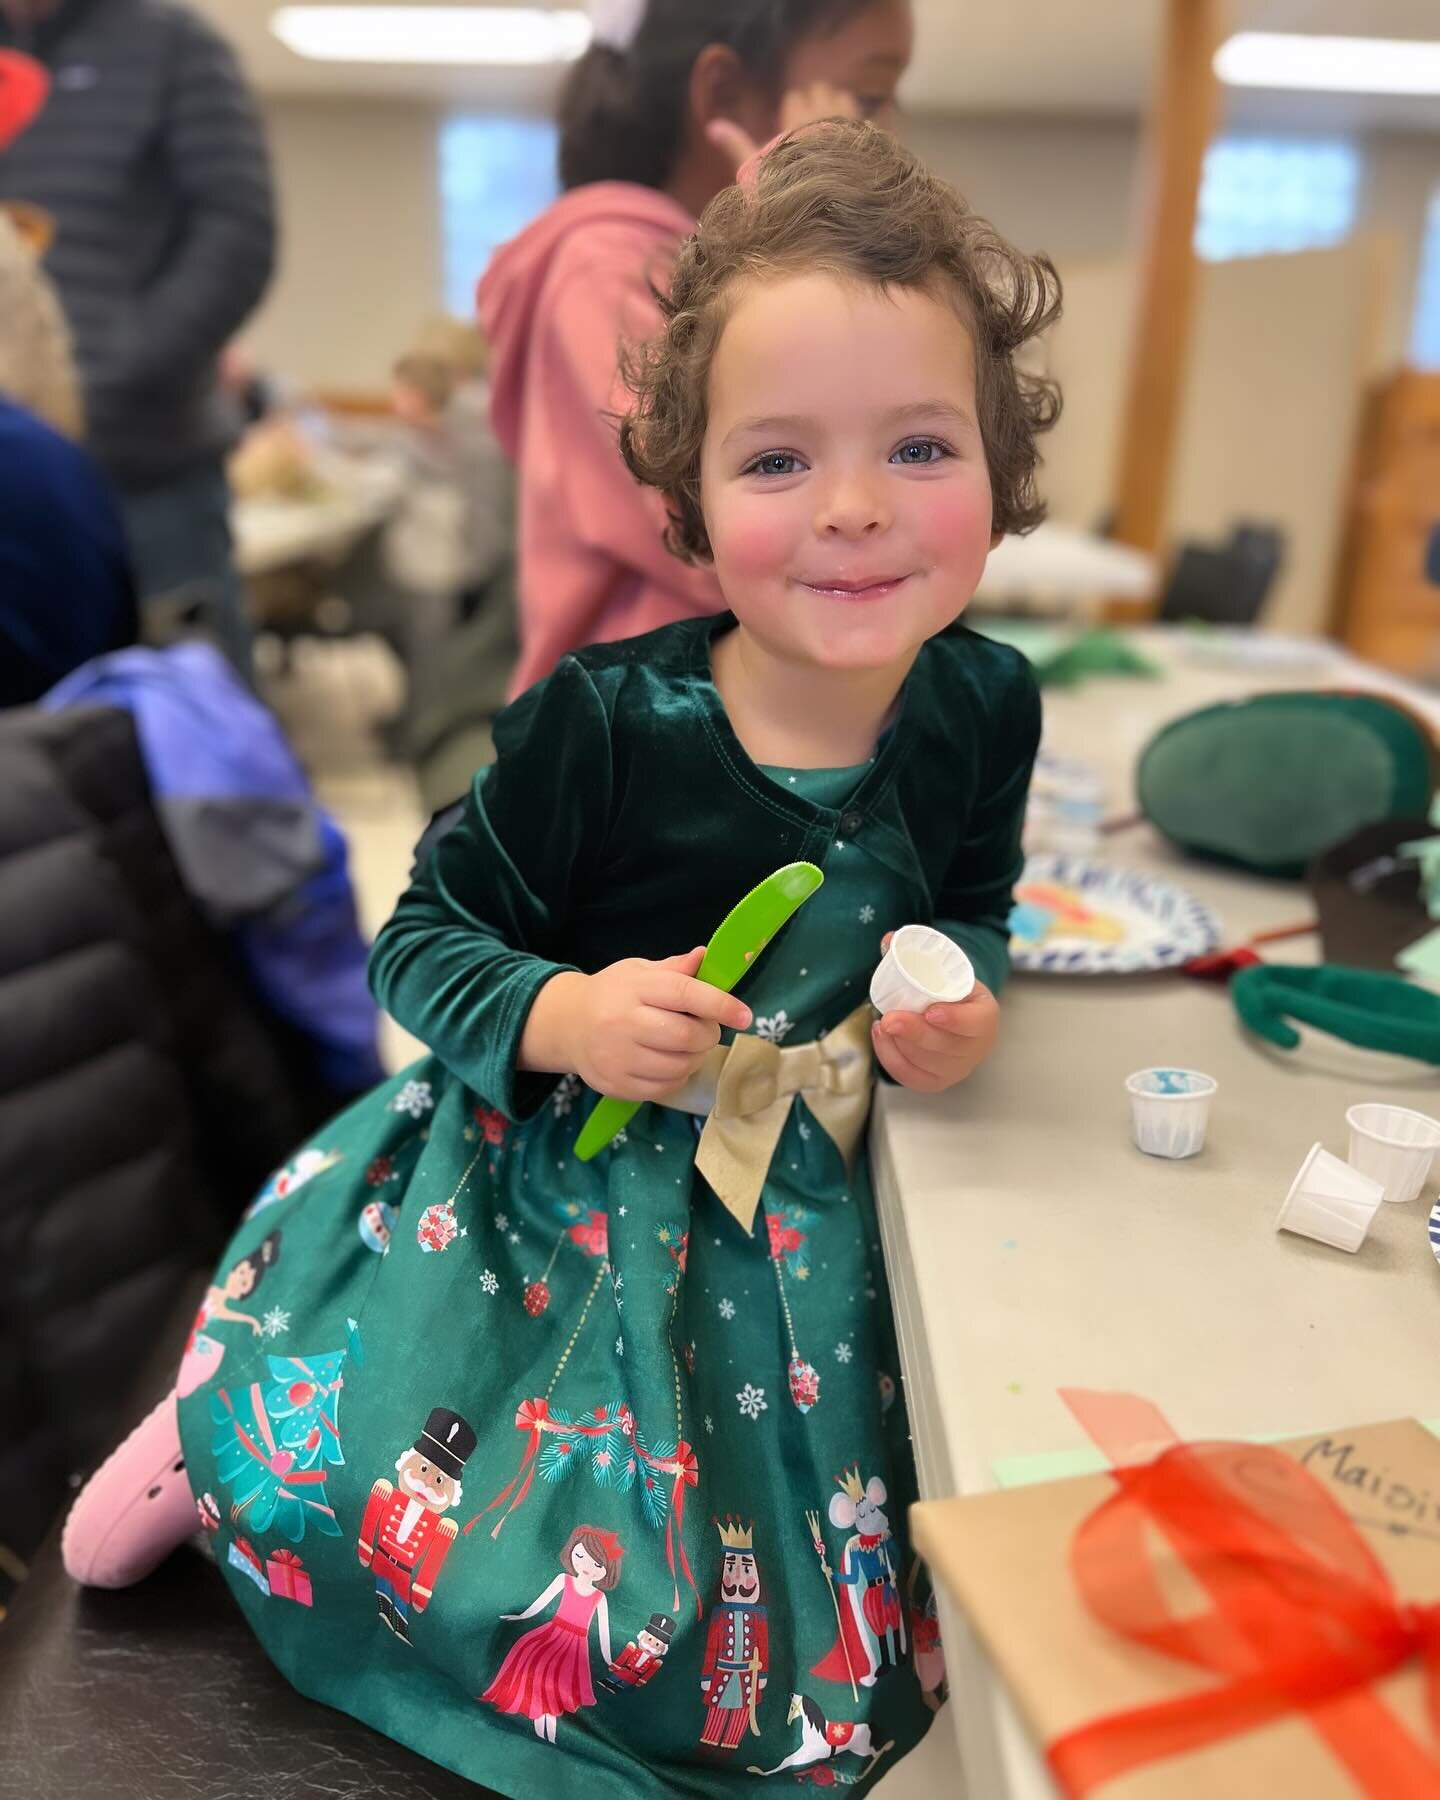 Last week, we had such a wonderful solstice celebration! Eastside kiddos snuck in a quick trip to the downtown Bend library while visiting our Downtown friends! Pictures were scarce because we were so busy having fun! 

#solsticecelebration #winterso